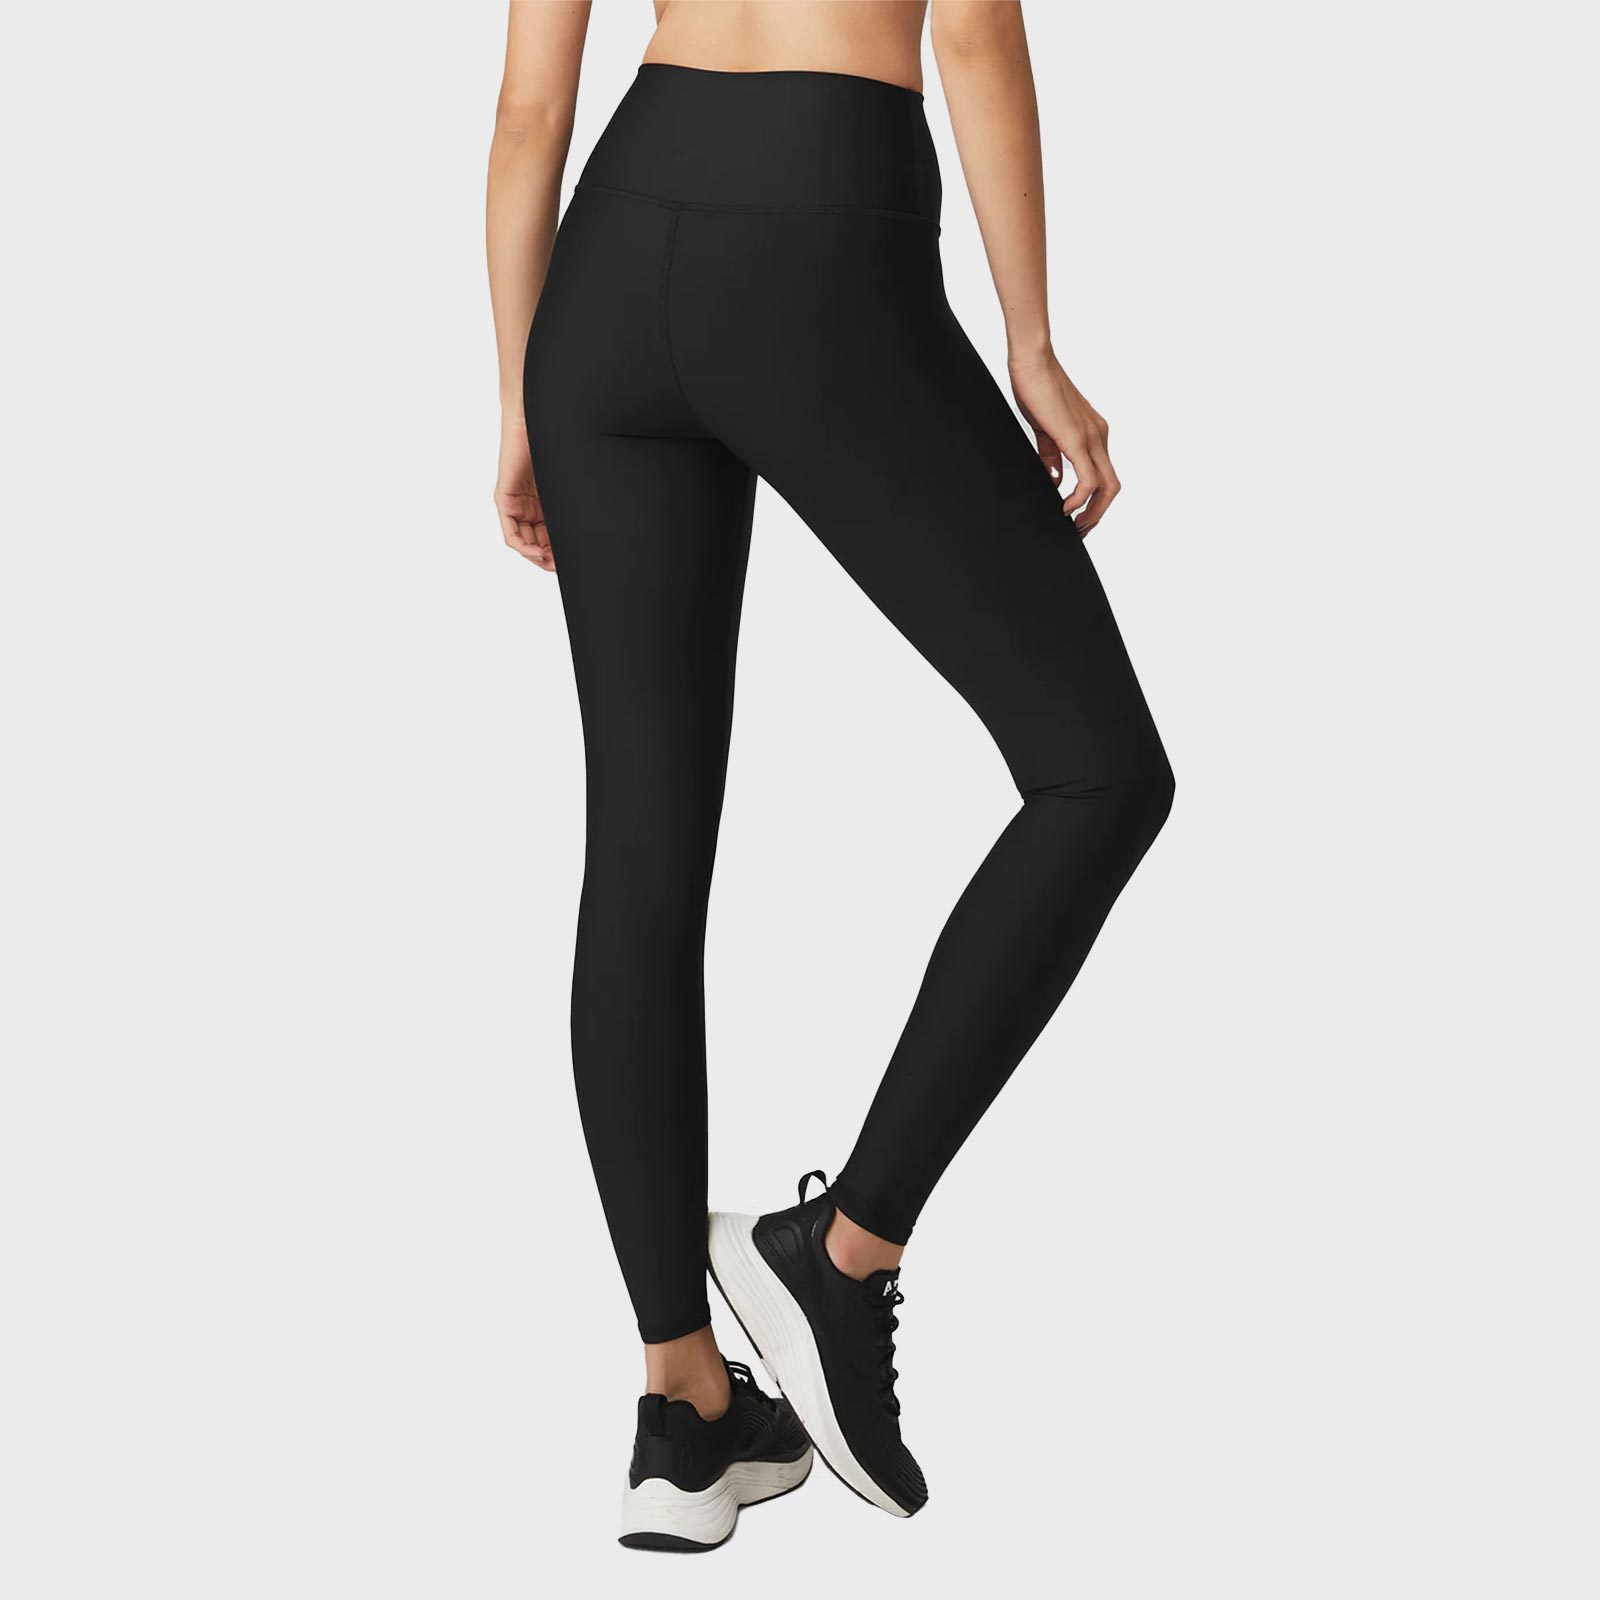 Womens Sexy Skinny Yoga Pants High Waisted Tummy Control Butt Lifting  Leggings with Pockets Twerking Workout Gym Trousers Black at  Women's  Clothing store